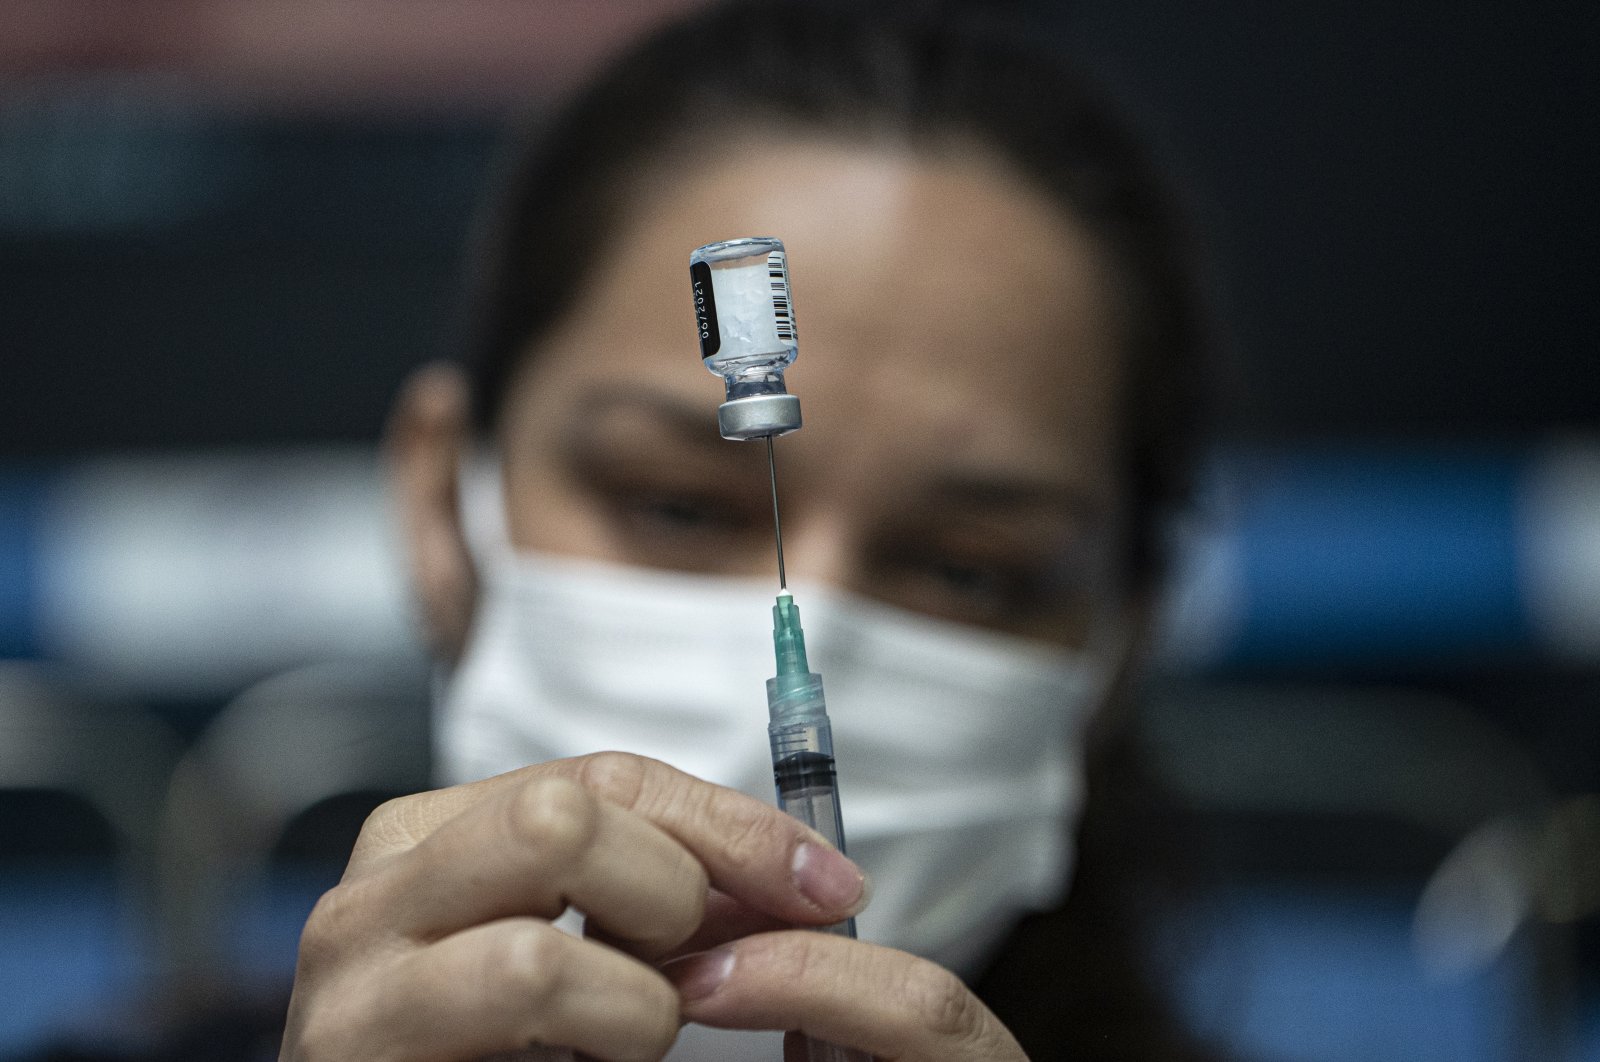 A health care worker prepares a dose of the Pfizer COVID-19 vaccine at the Victor Jara Stadium in Santiago, Chile, March 30, 2021. (AP Photo)